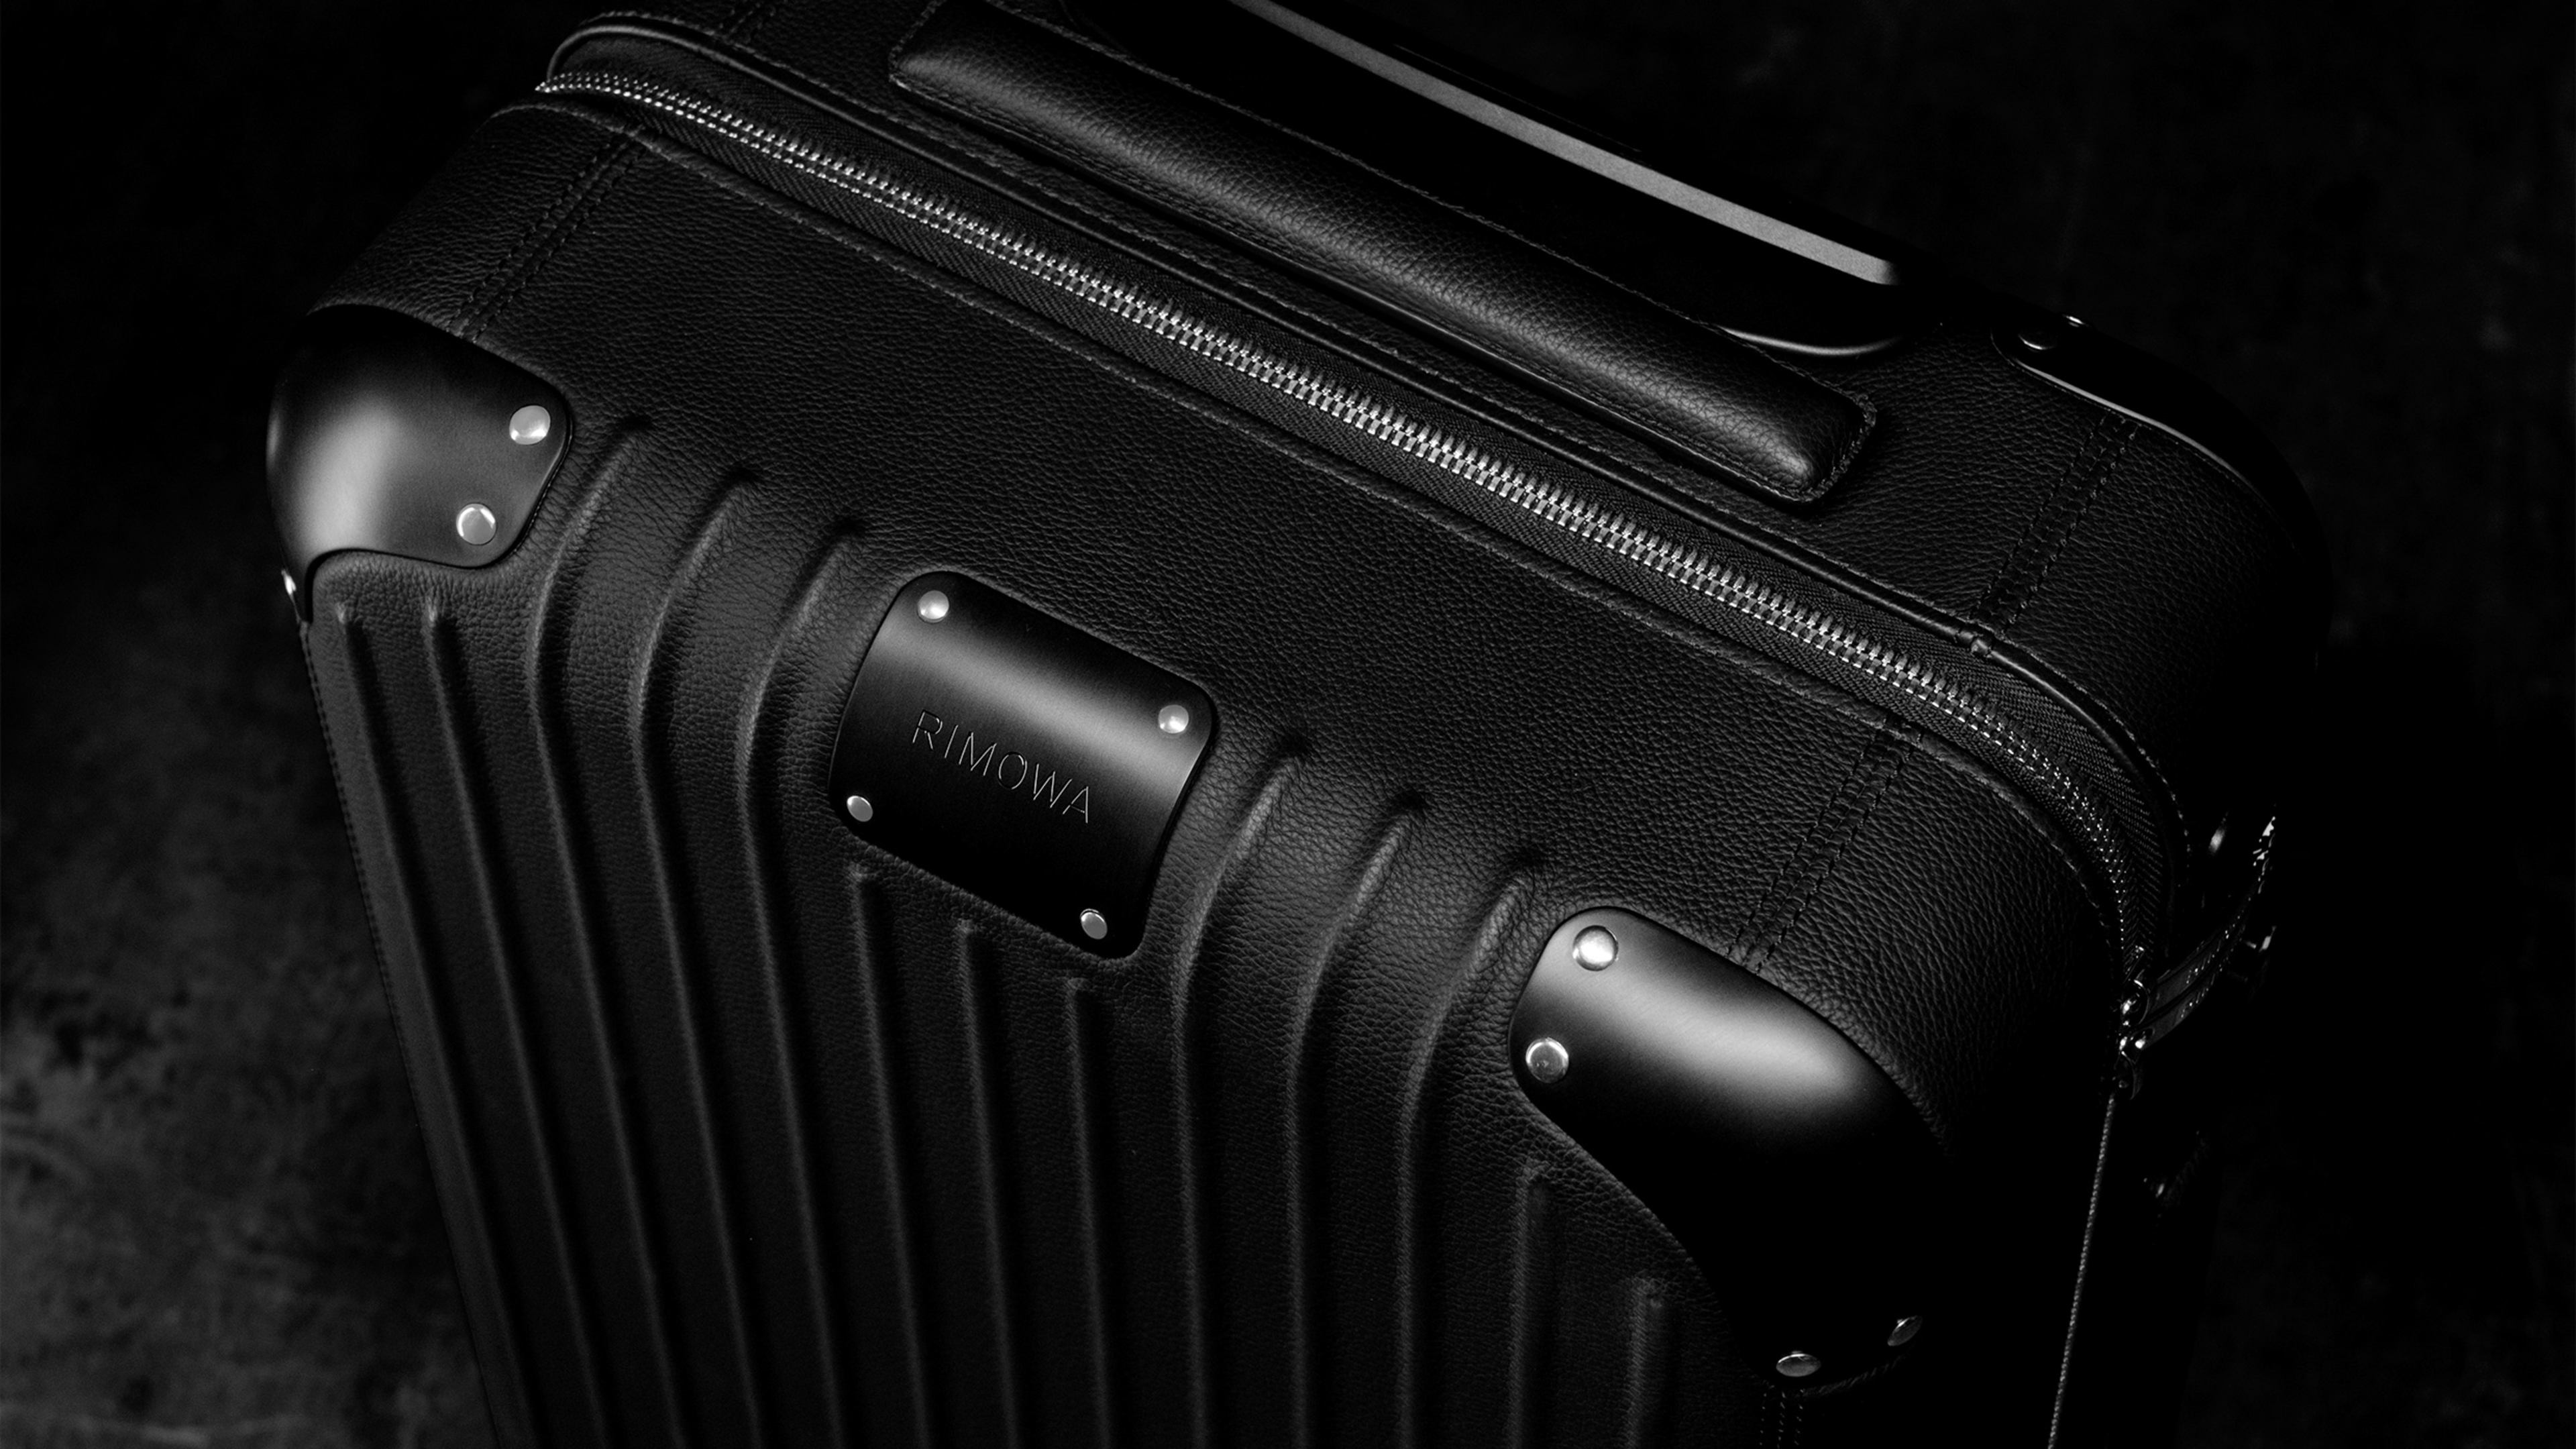 Rimowa's first-ever leather suitcase is gorgeous